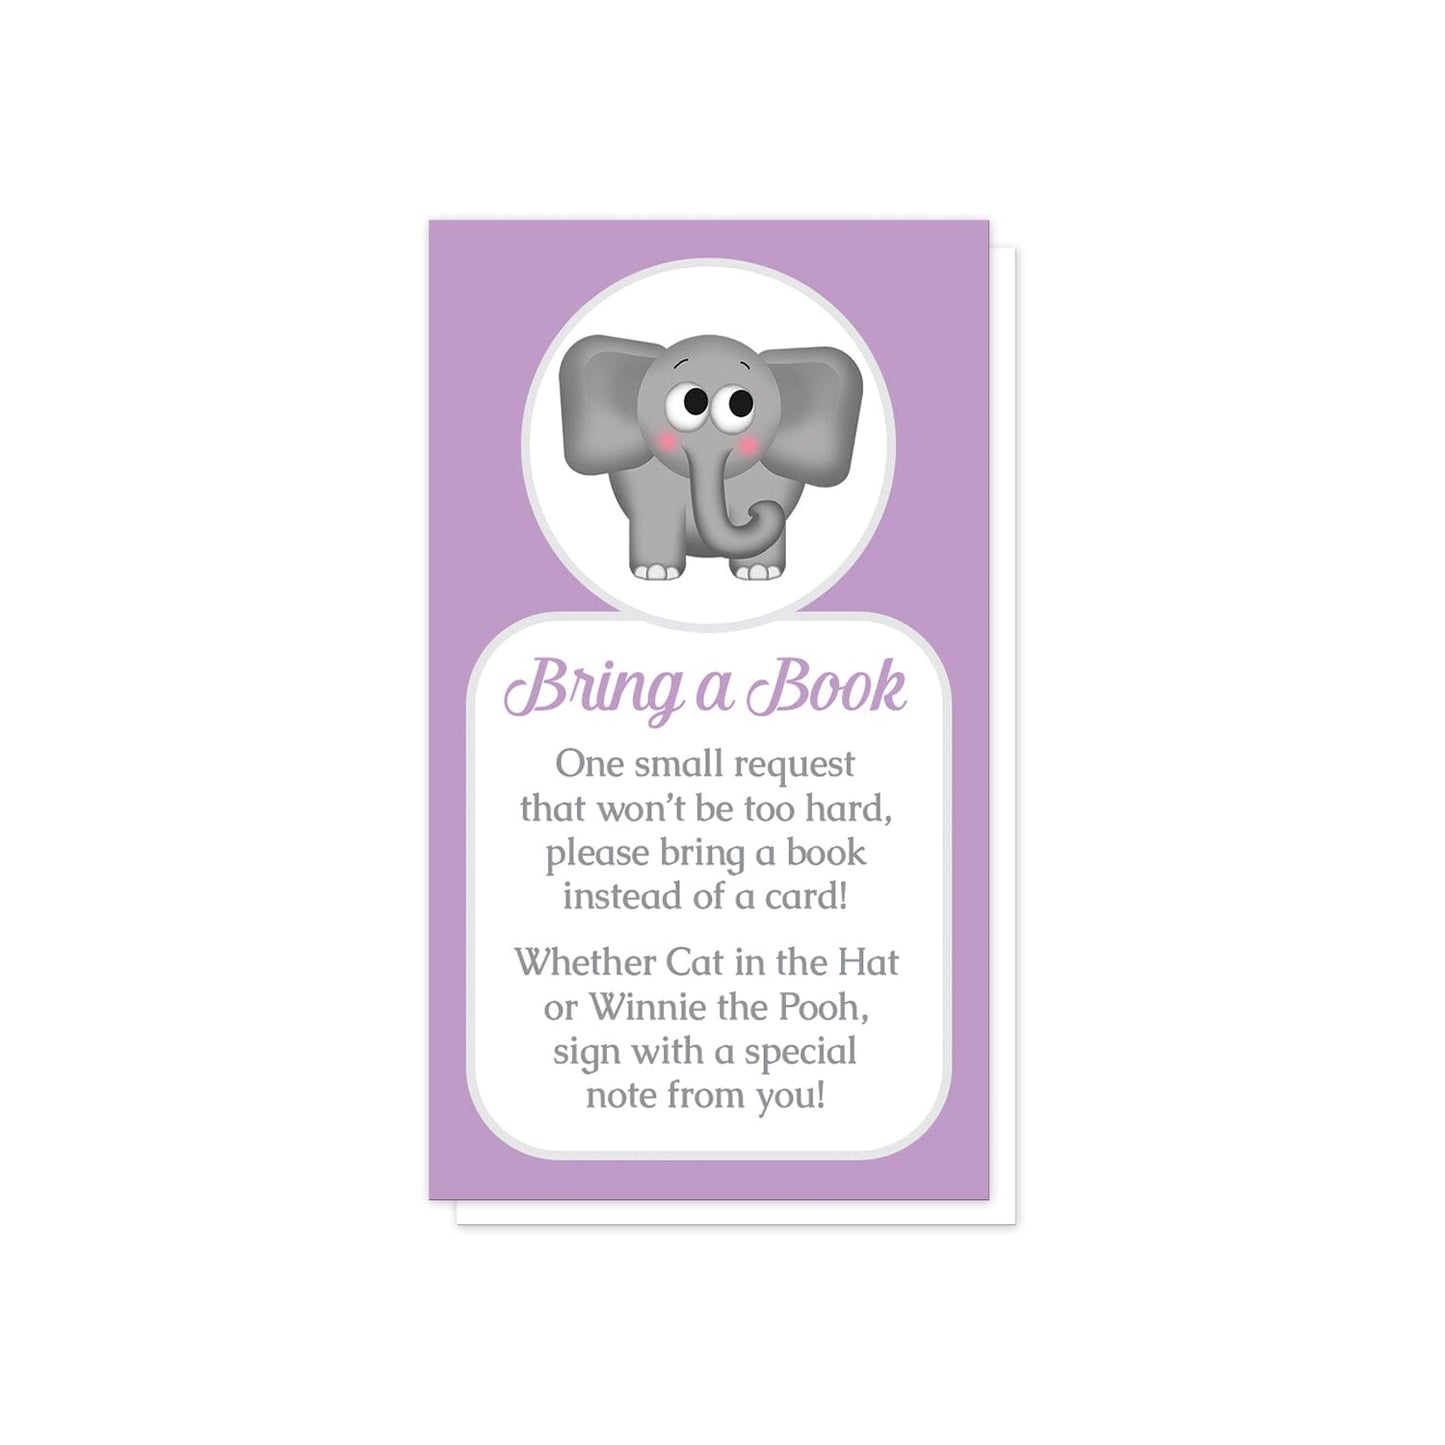 Cute Elephant Purple Bring a Book Cards at Artistically Invited. Cute elephant purple bring a book cards illustrated with an affectionate and adorable gray elephant in a white circle over a purple background color. Your book request details are printed in purple and gray in a white rectangular area below the cute little elephant.